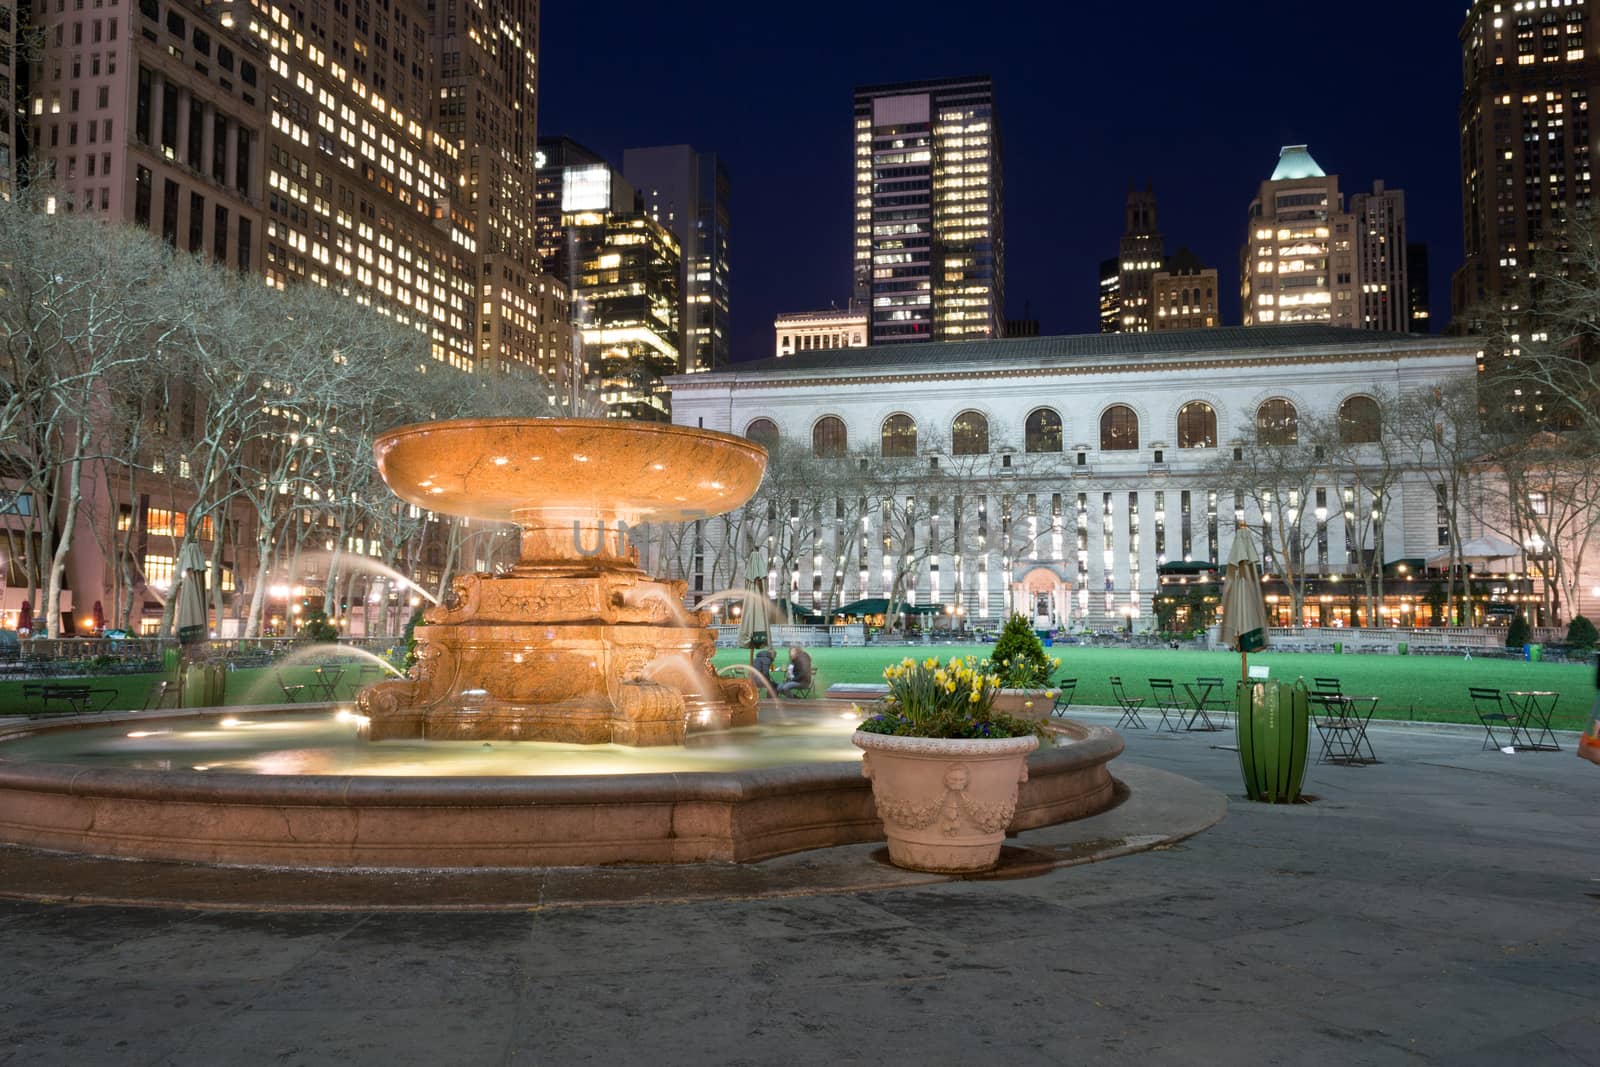 Fountain in front of the New York Public Library by rmbarricarte